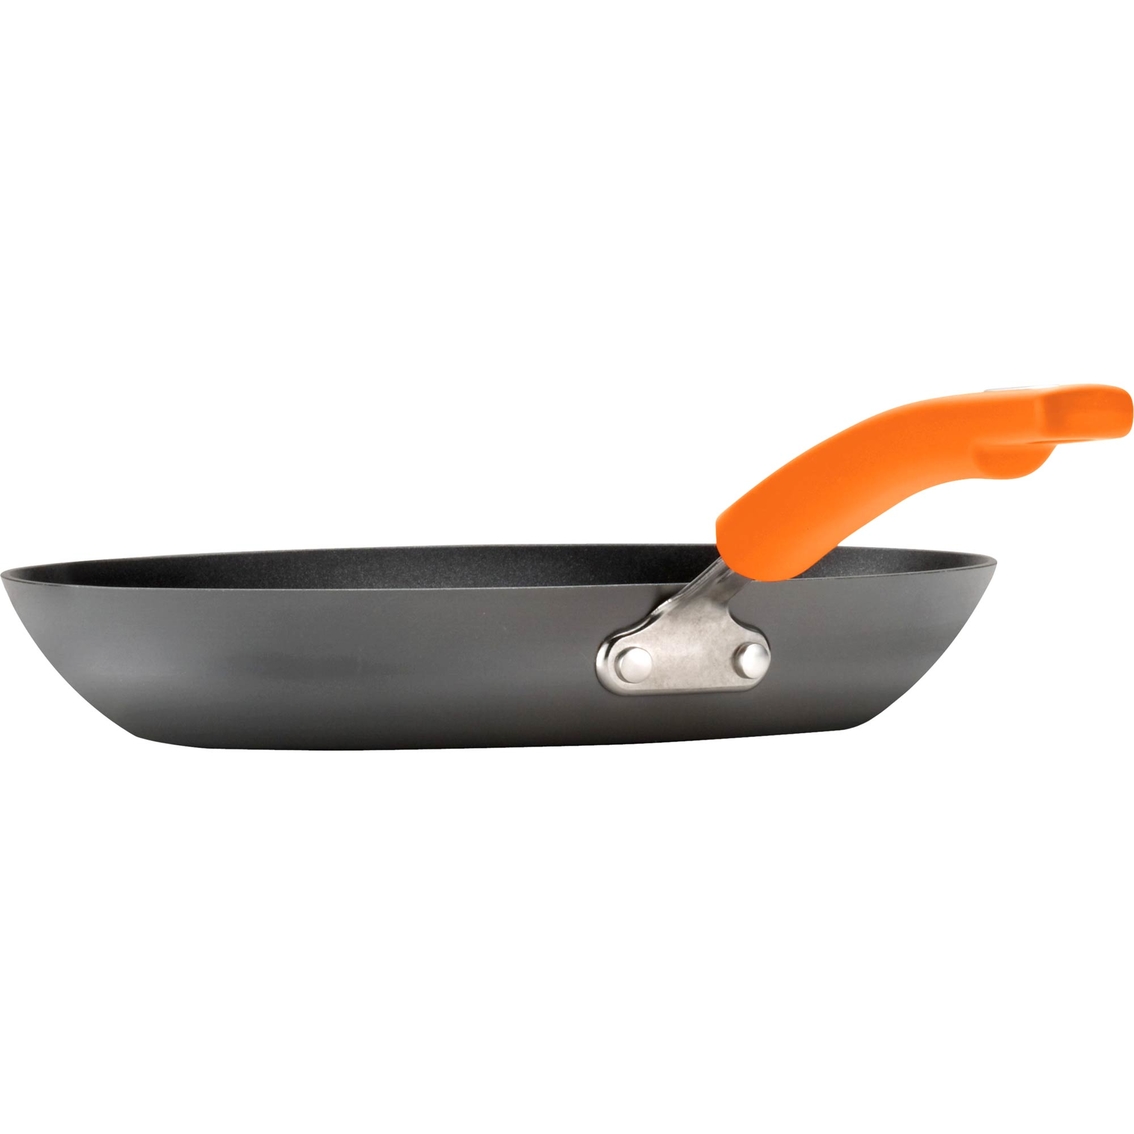 Rachael Ray Hard Anodized Nonstick 10 In. Skillet - Image 4 of 4